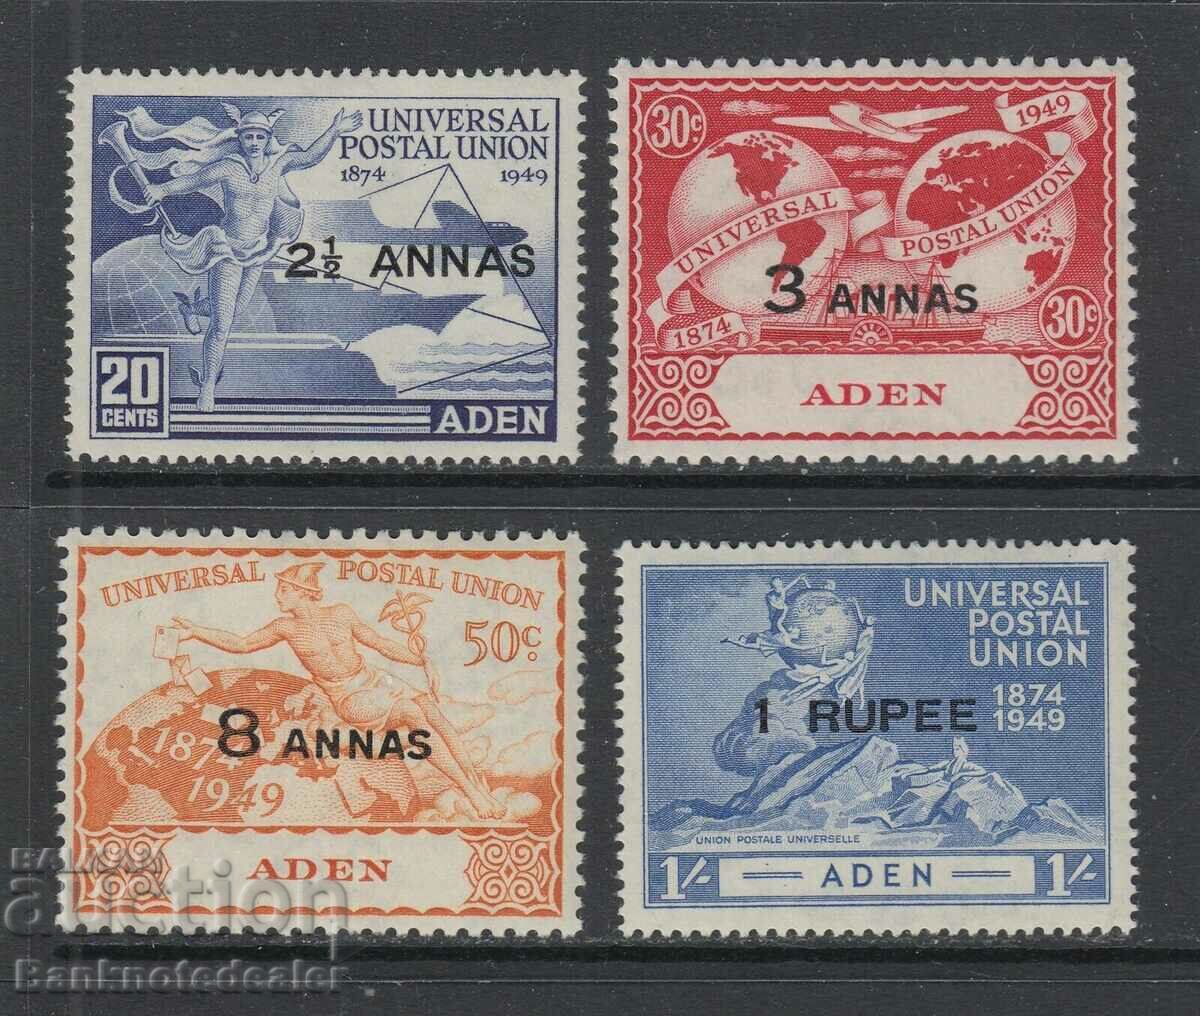 Aden 1949 UPU Anniversary Set 4 Stamps SG32-35 MH